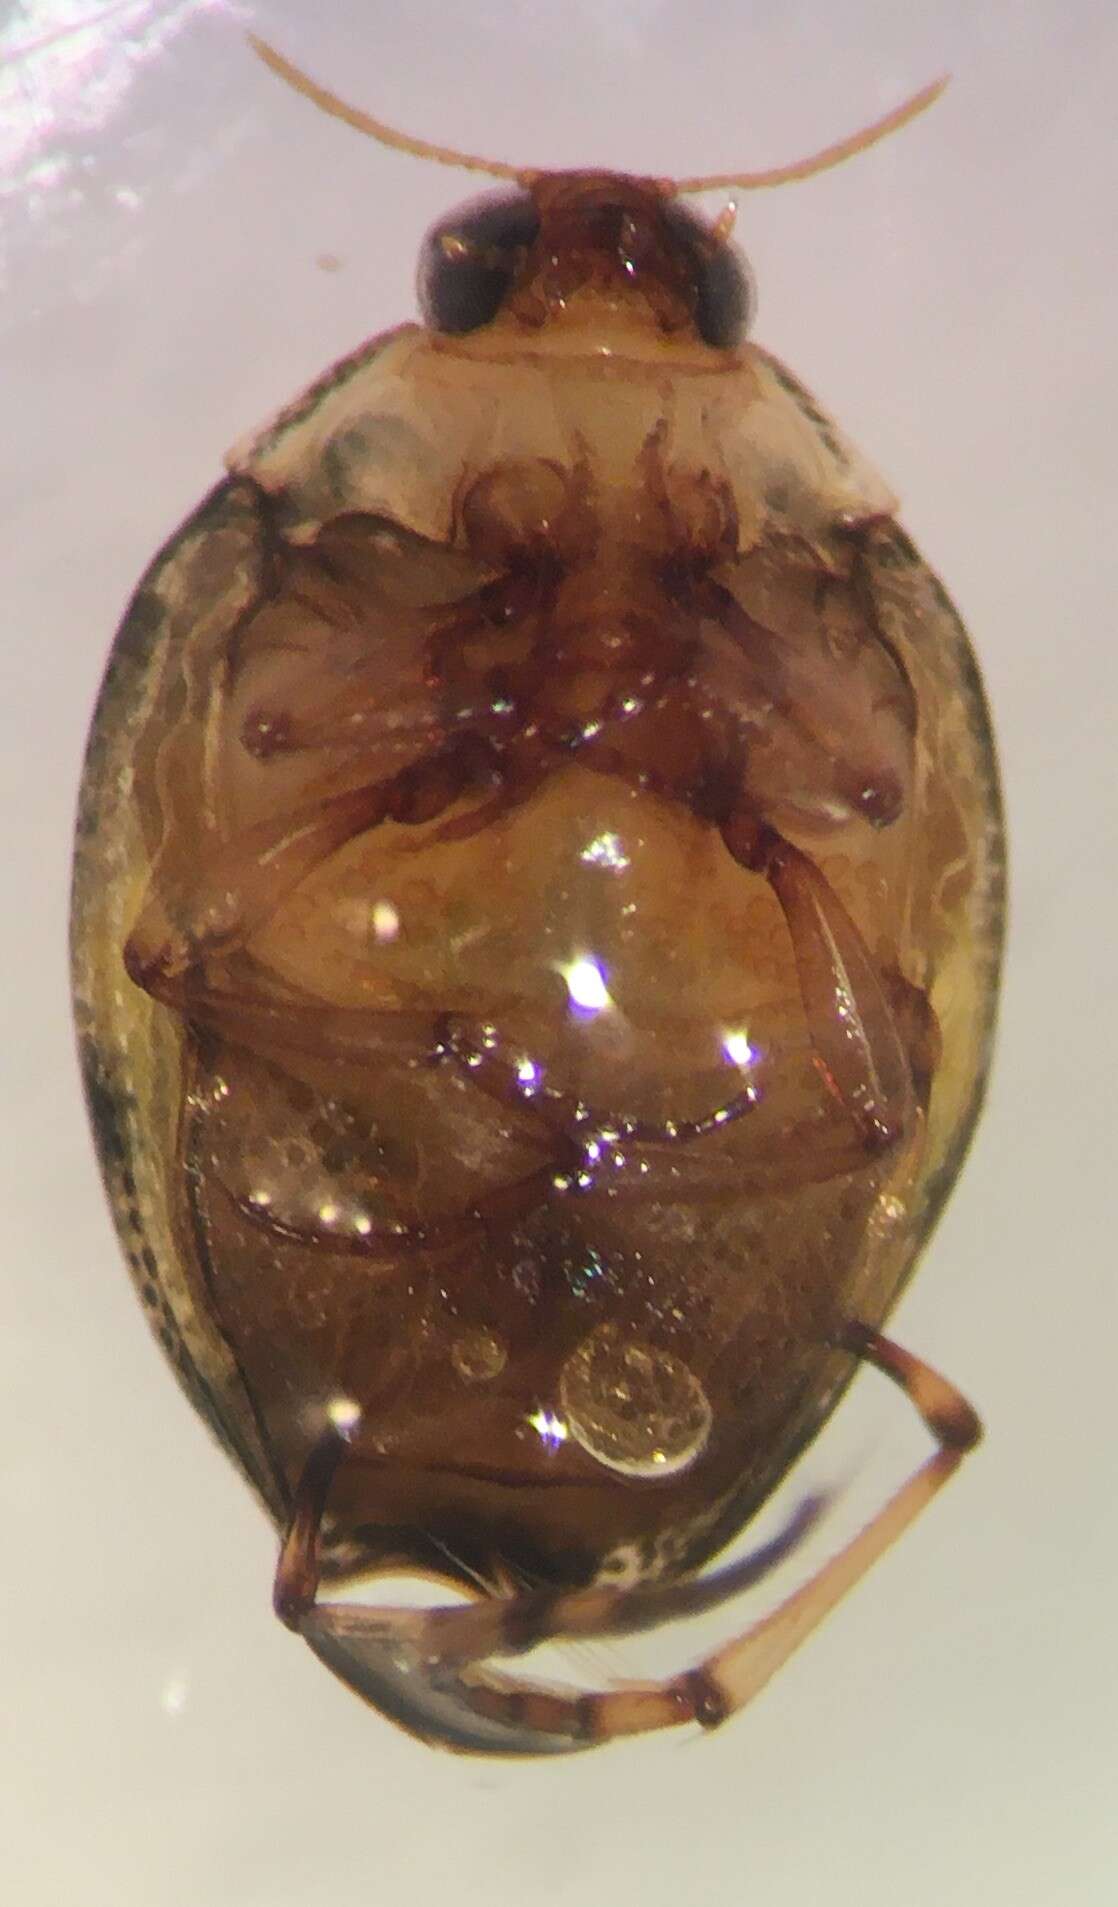 Image of Peltodytes dietrichi Young 1961